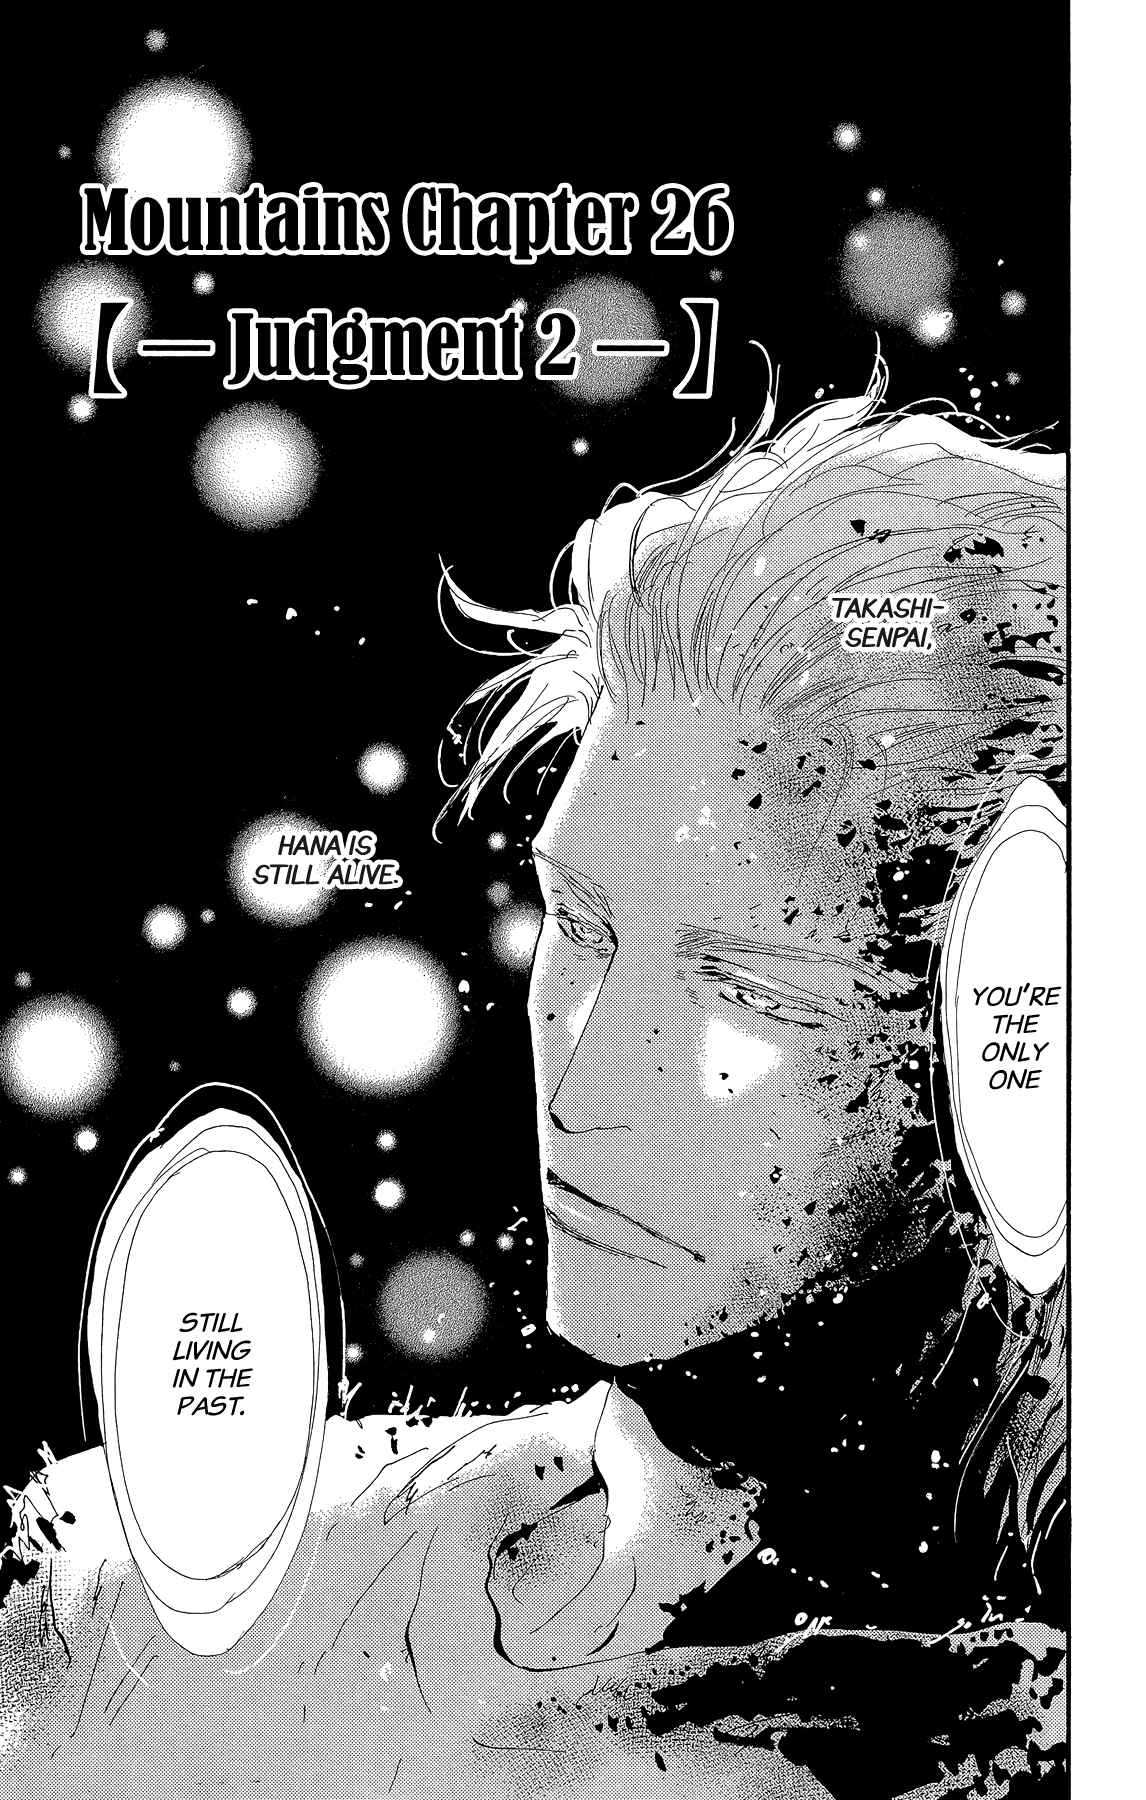 7 Seeds Vol. 31 Ch. 161 Mountains Chapter 26 [Judgment 2]